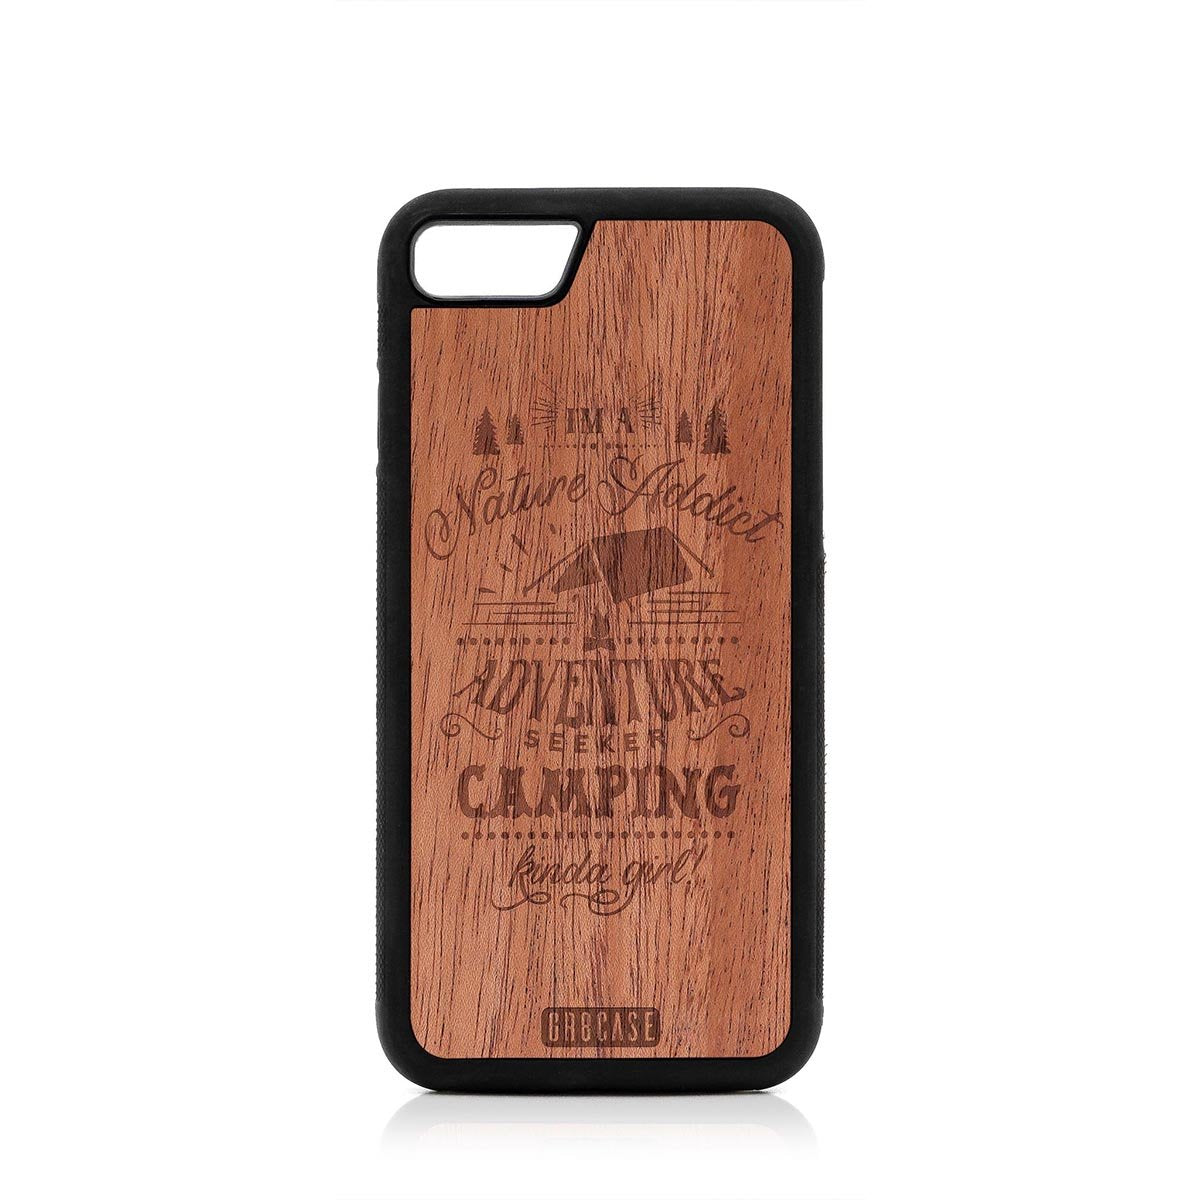 I'm A Nature Addict Adventure Seeker Camping Kinda Girl Design Wood Case For iPhone SE 2020 by GR8CASE